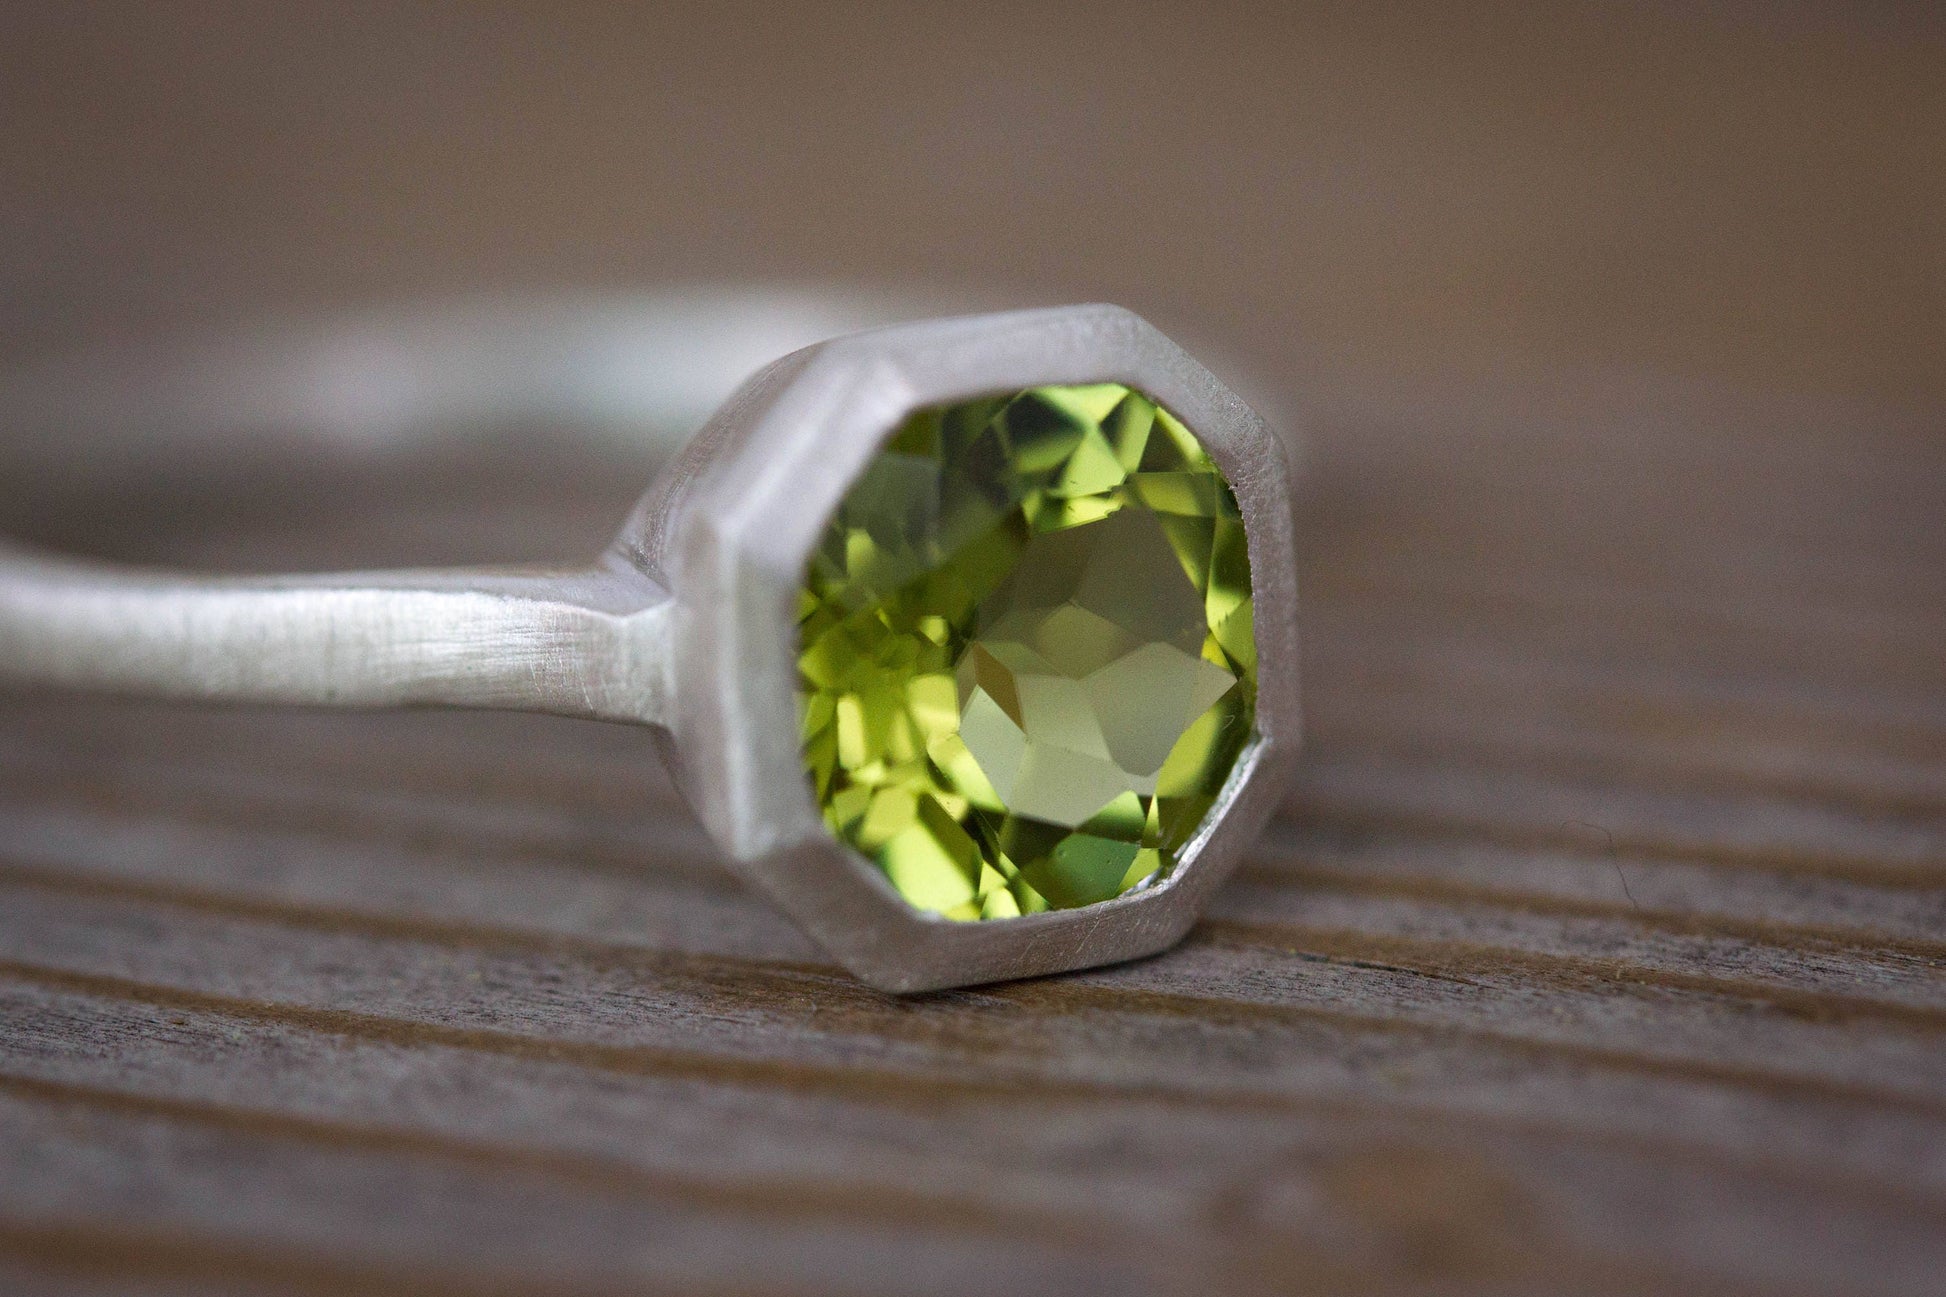 A handmade Peridot Ring from Cassin Jewelry on a wooden table.